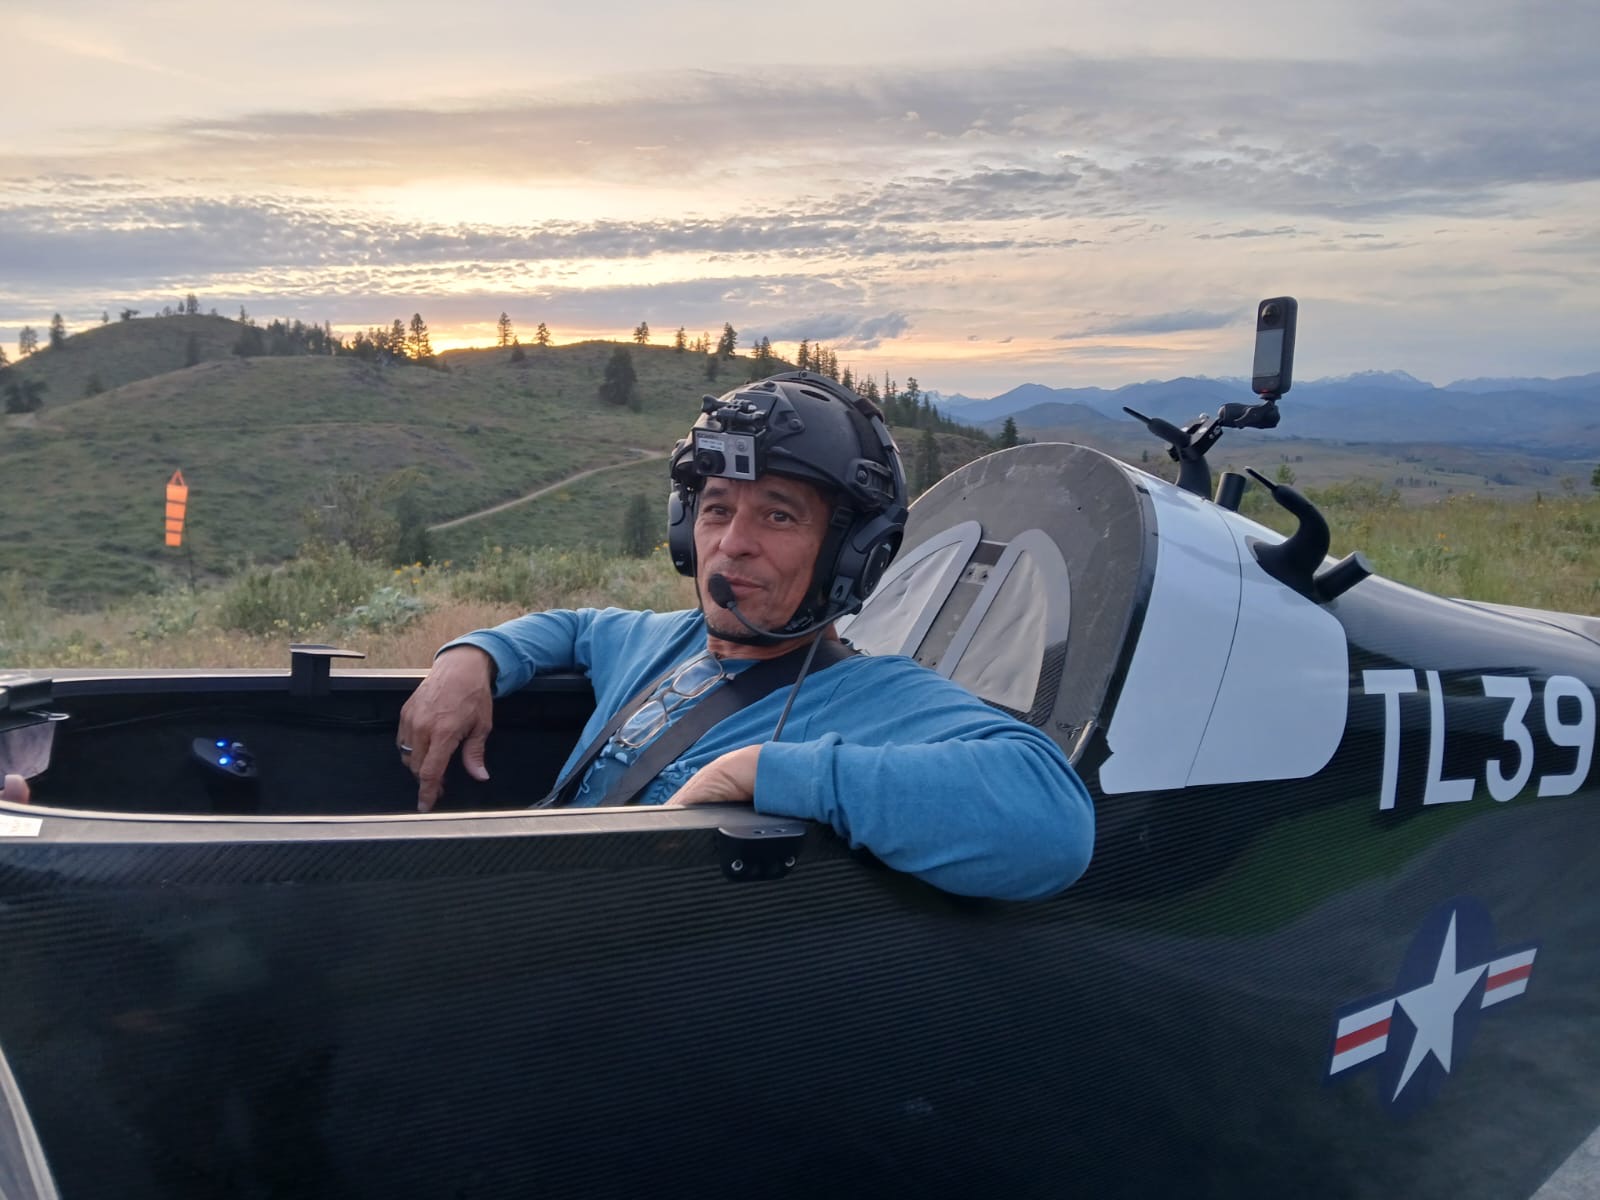 A person wearing a helmet with a mounted camera and headset sits in a black glider cockpit marked with "TL39." The background shows a hilly, scenic sunset.